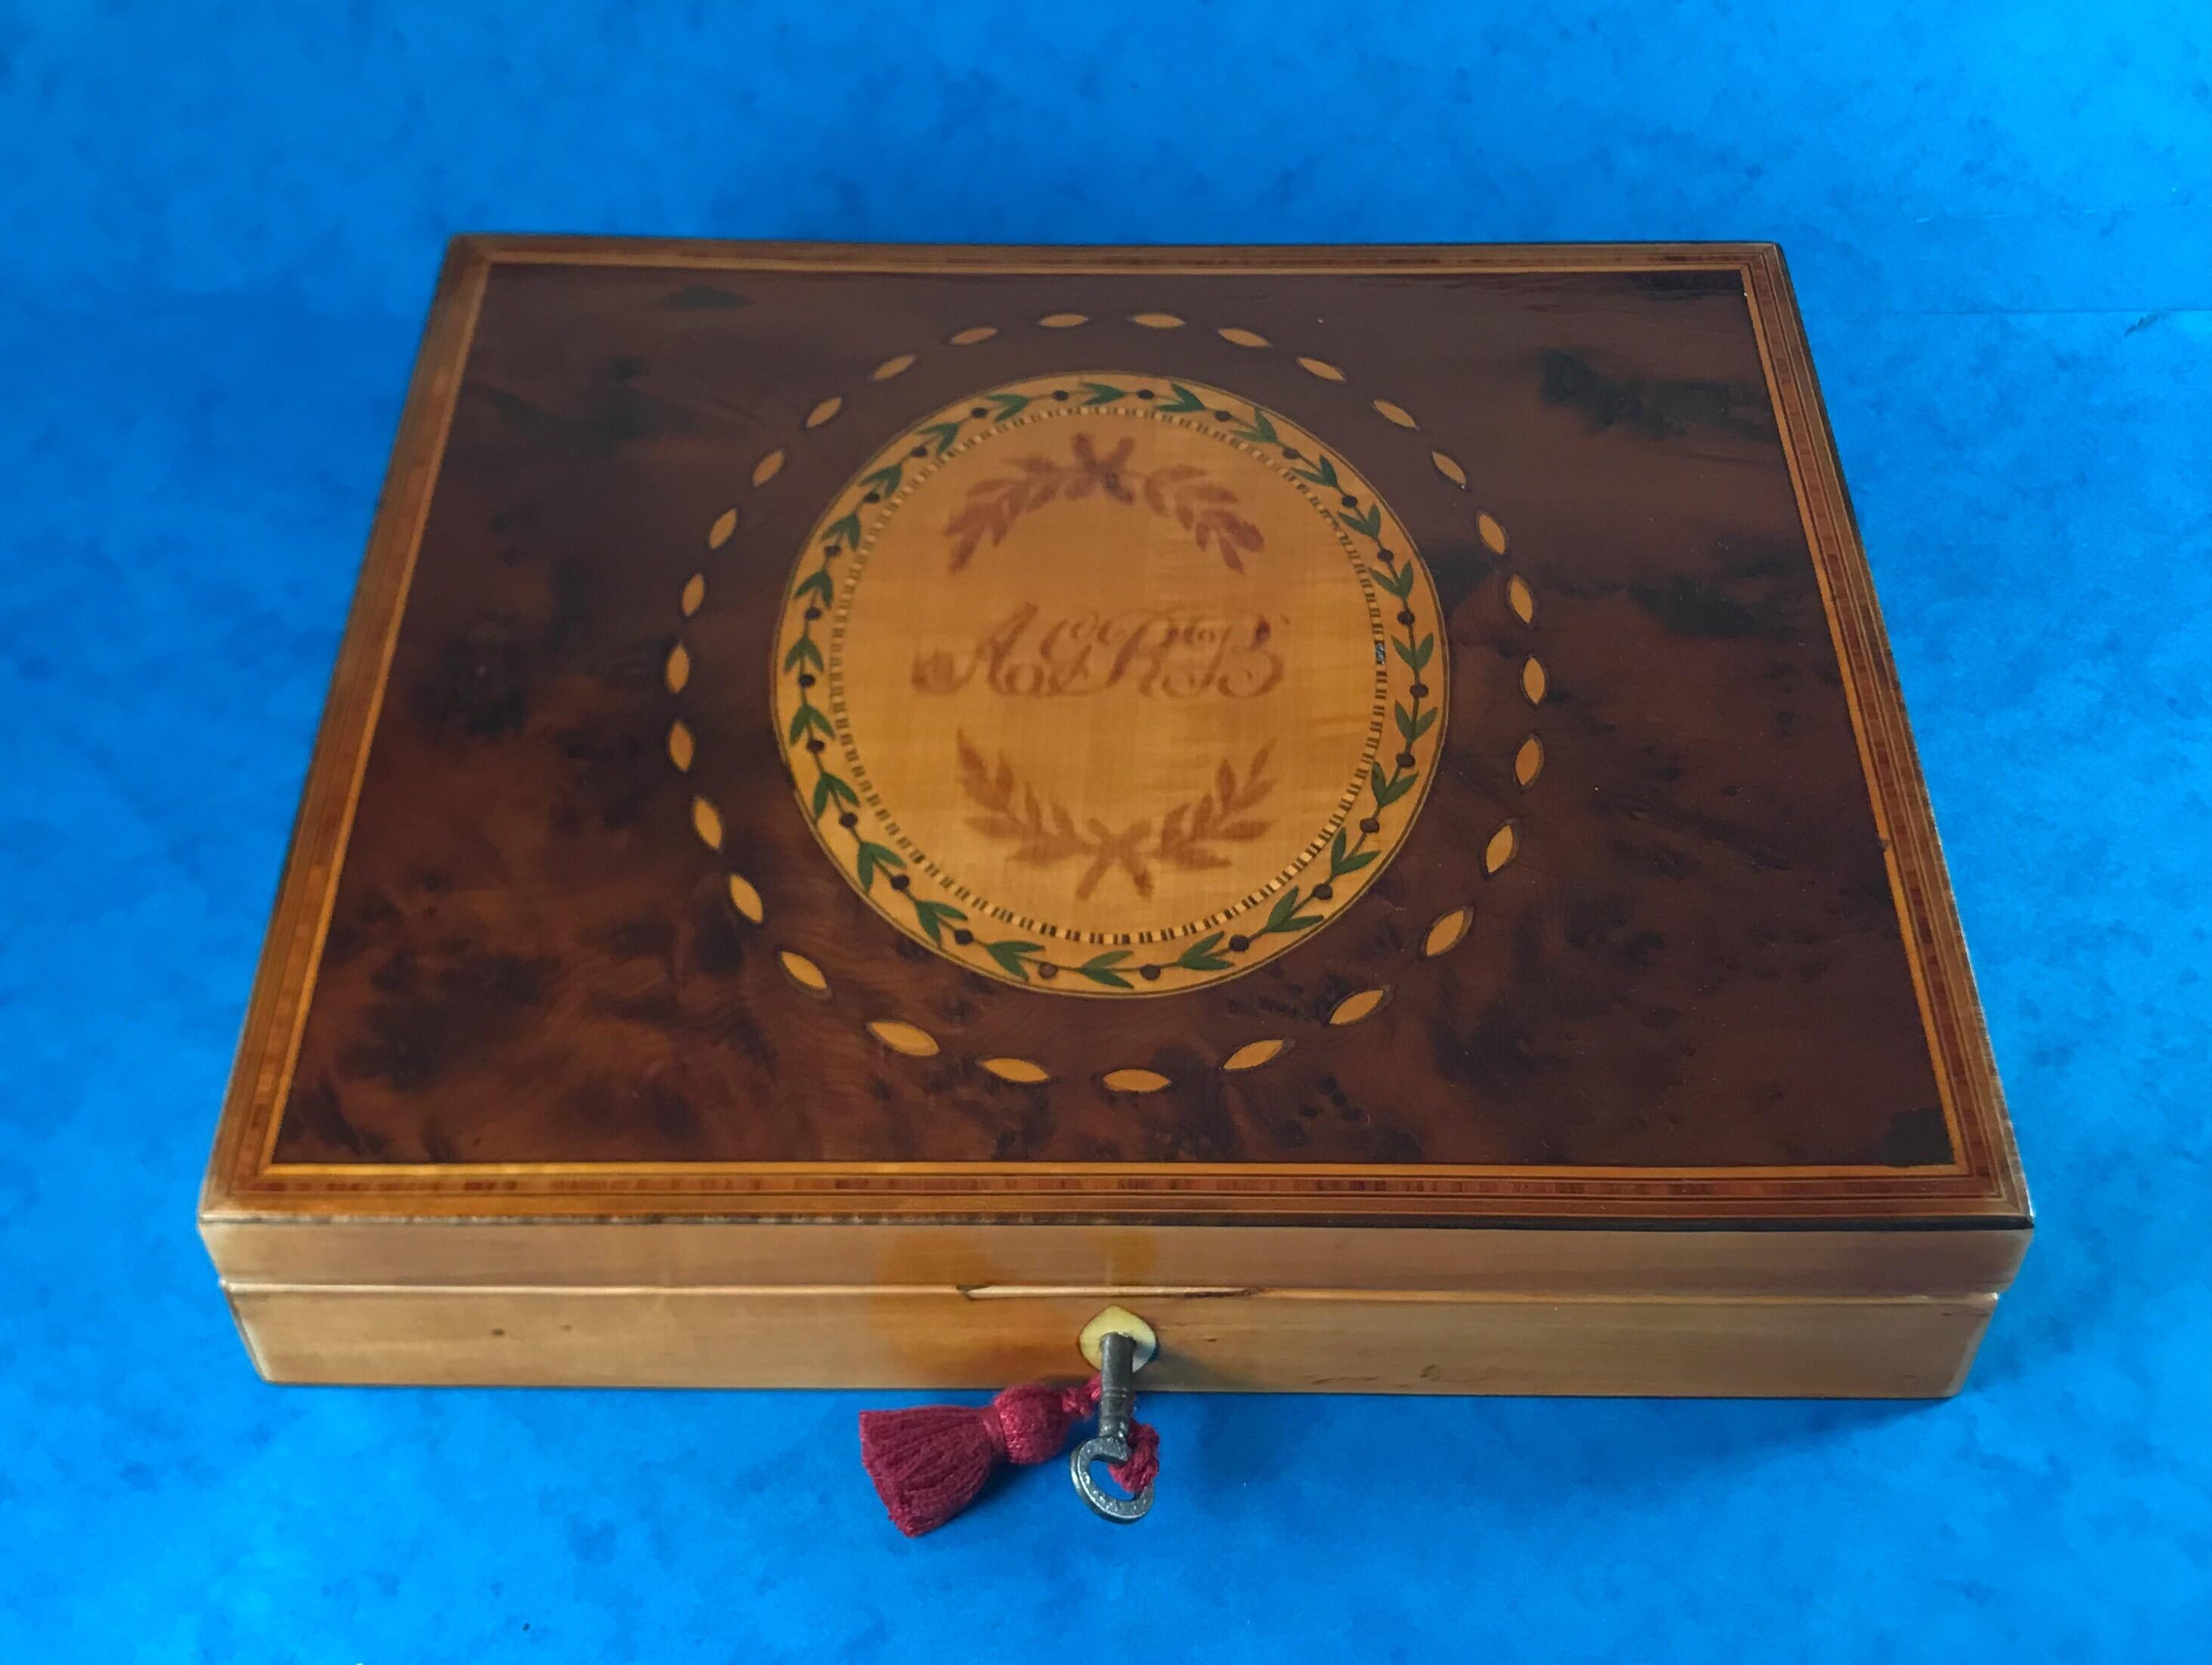 A George III 1785 Sheraton Burr yew hexancgle sycamore stationary box, it has a sycamore panel to the centre which is Harewood and sycamore inlaid, it’s boxwood and tulip wood crossbanded and inlaid around the edge of the box. The lock has bowed